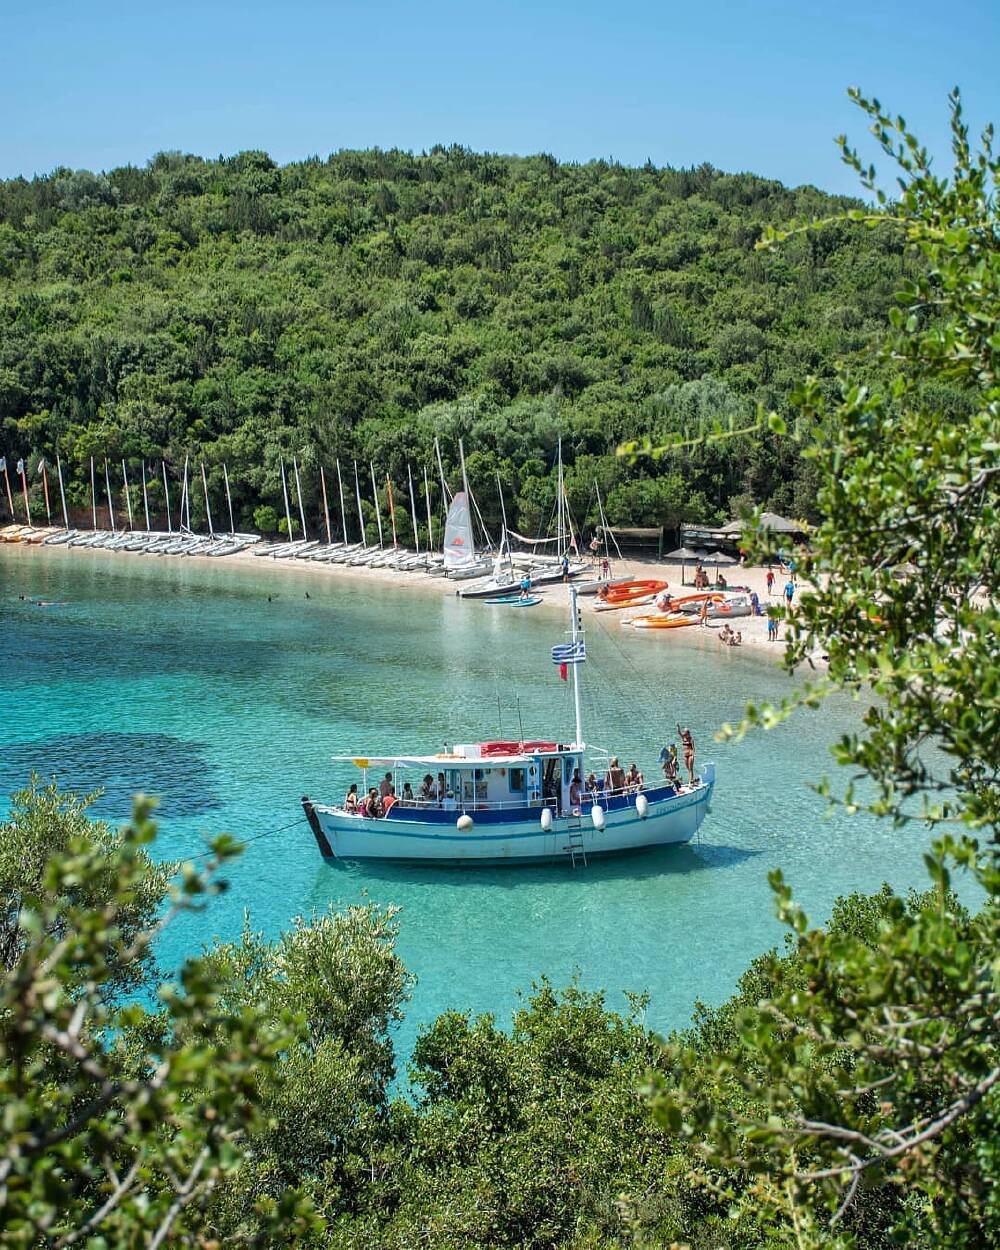 10 Mainland Greece Beach Destinations That Don’t Require Flying